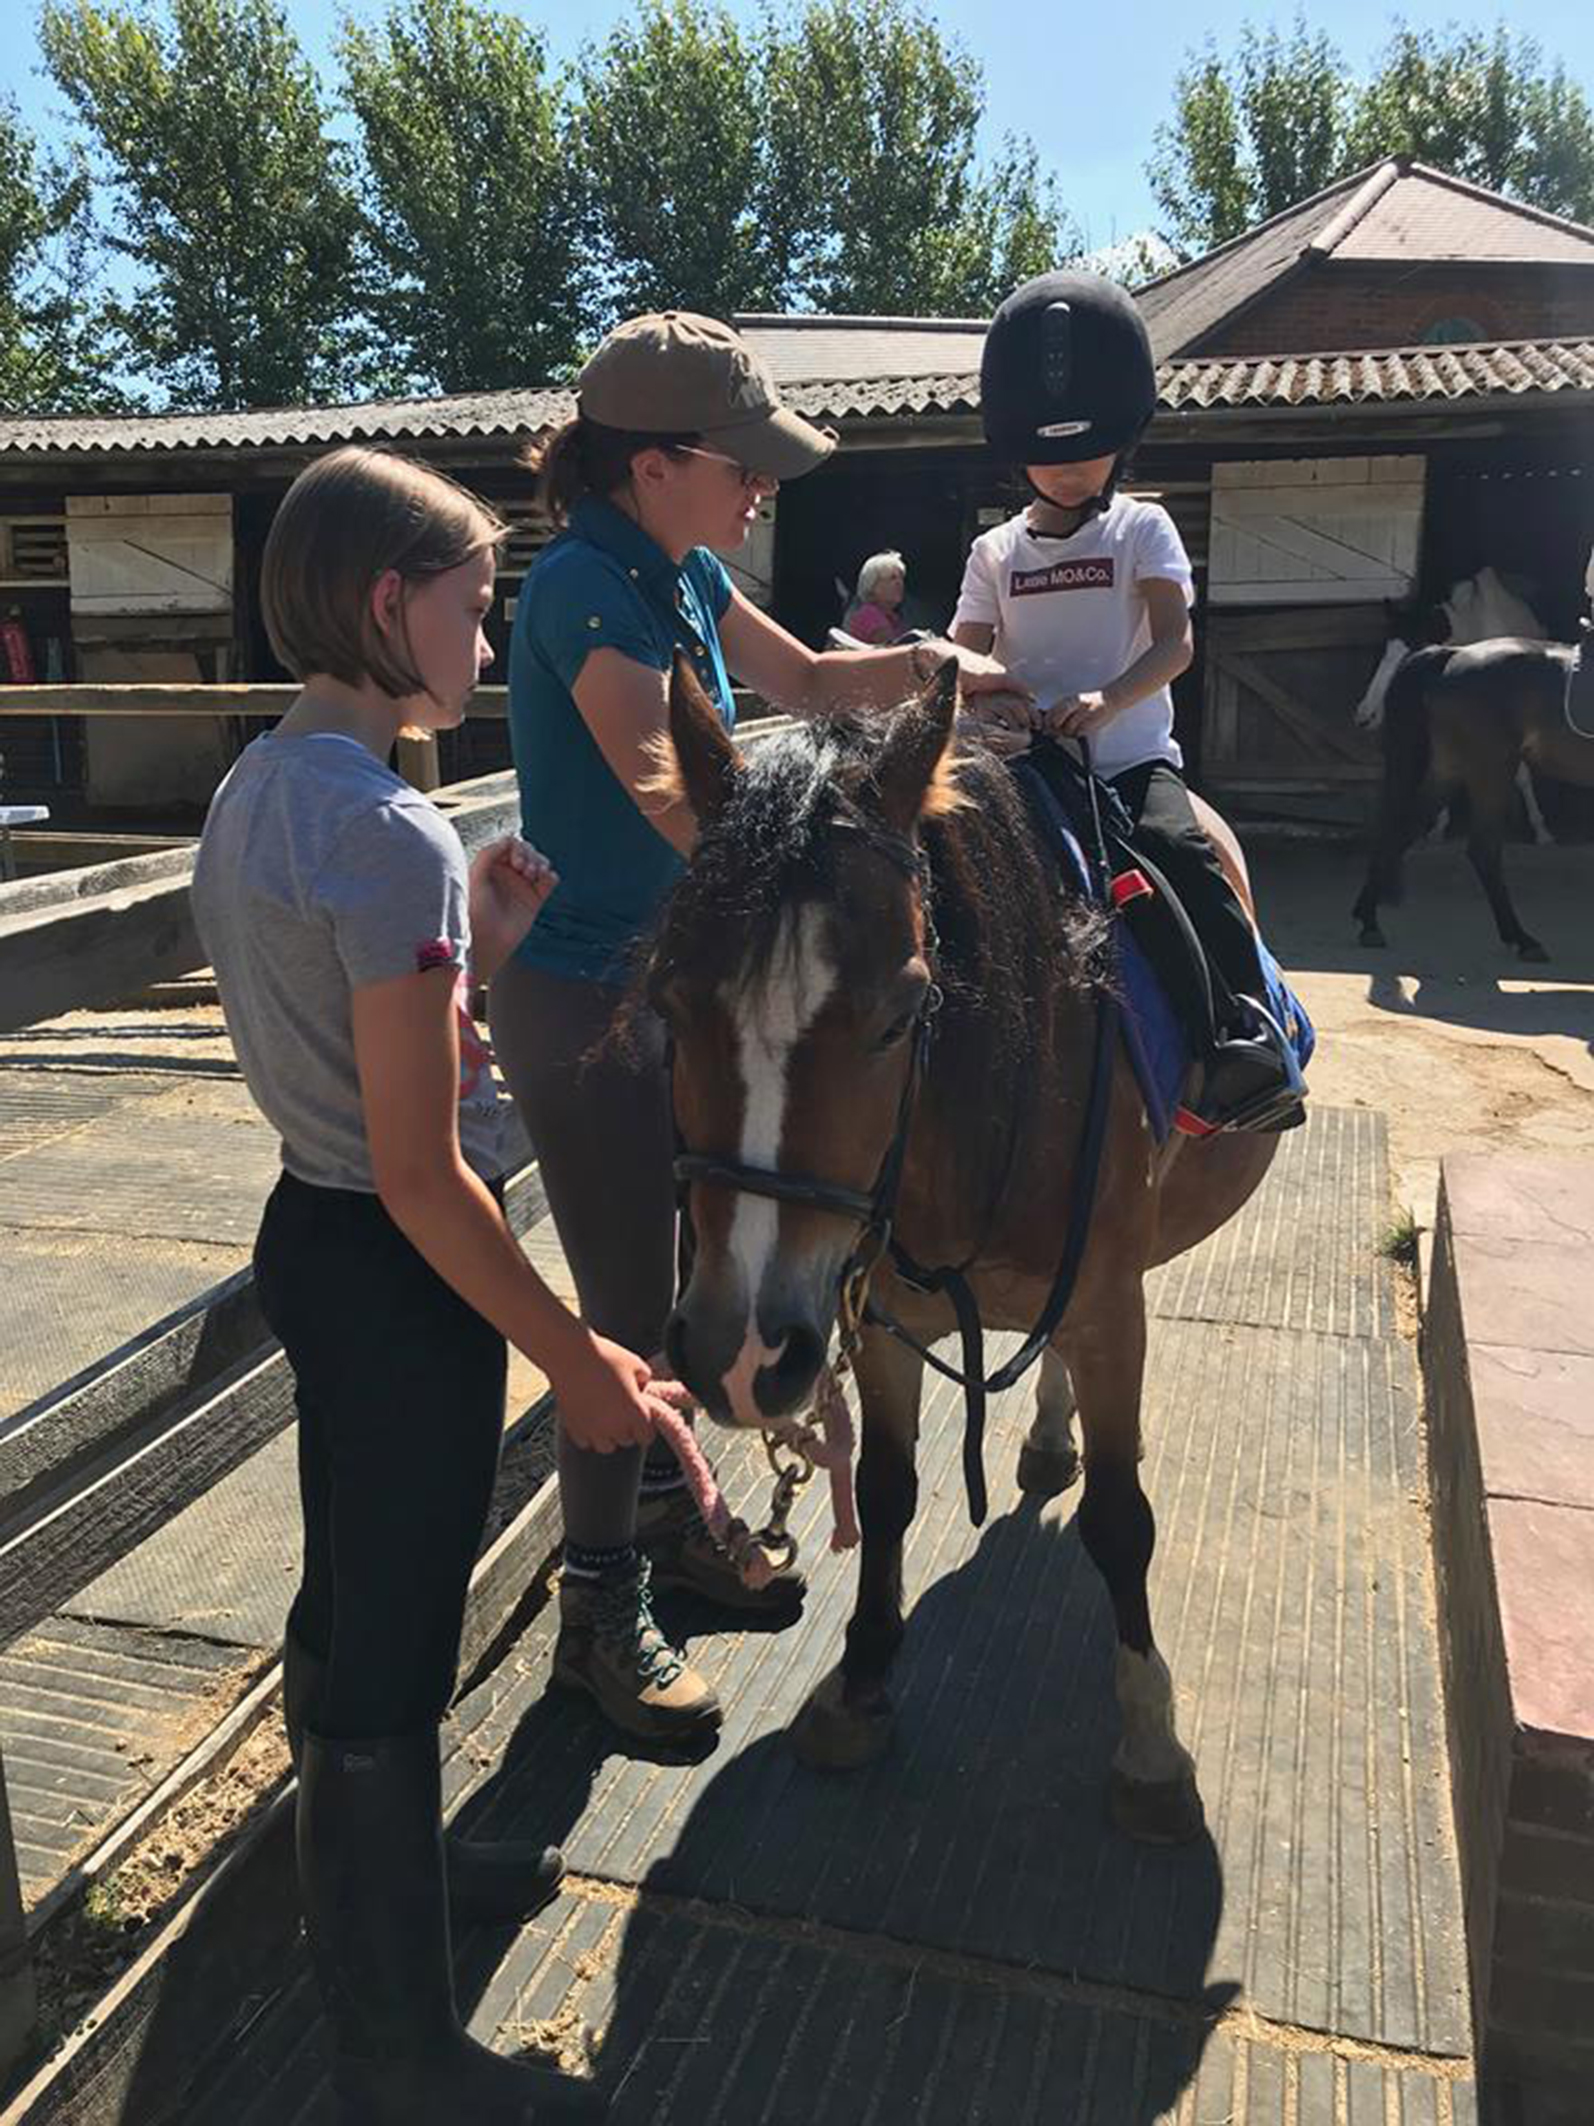 Kingsmead Equestrian Centre based in Surrey is holding a special event to mark Disabled Access Day